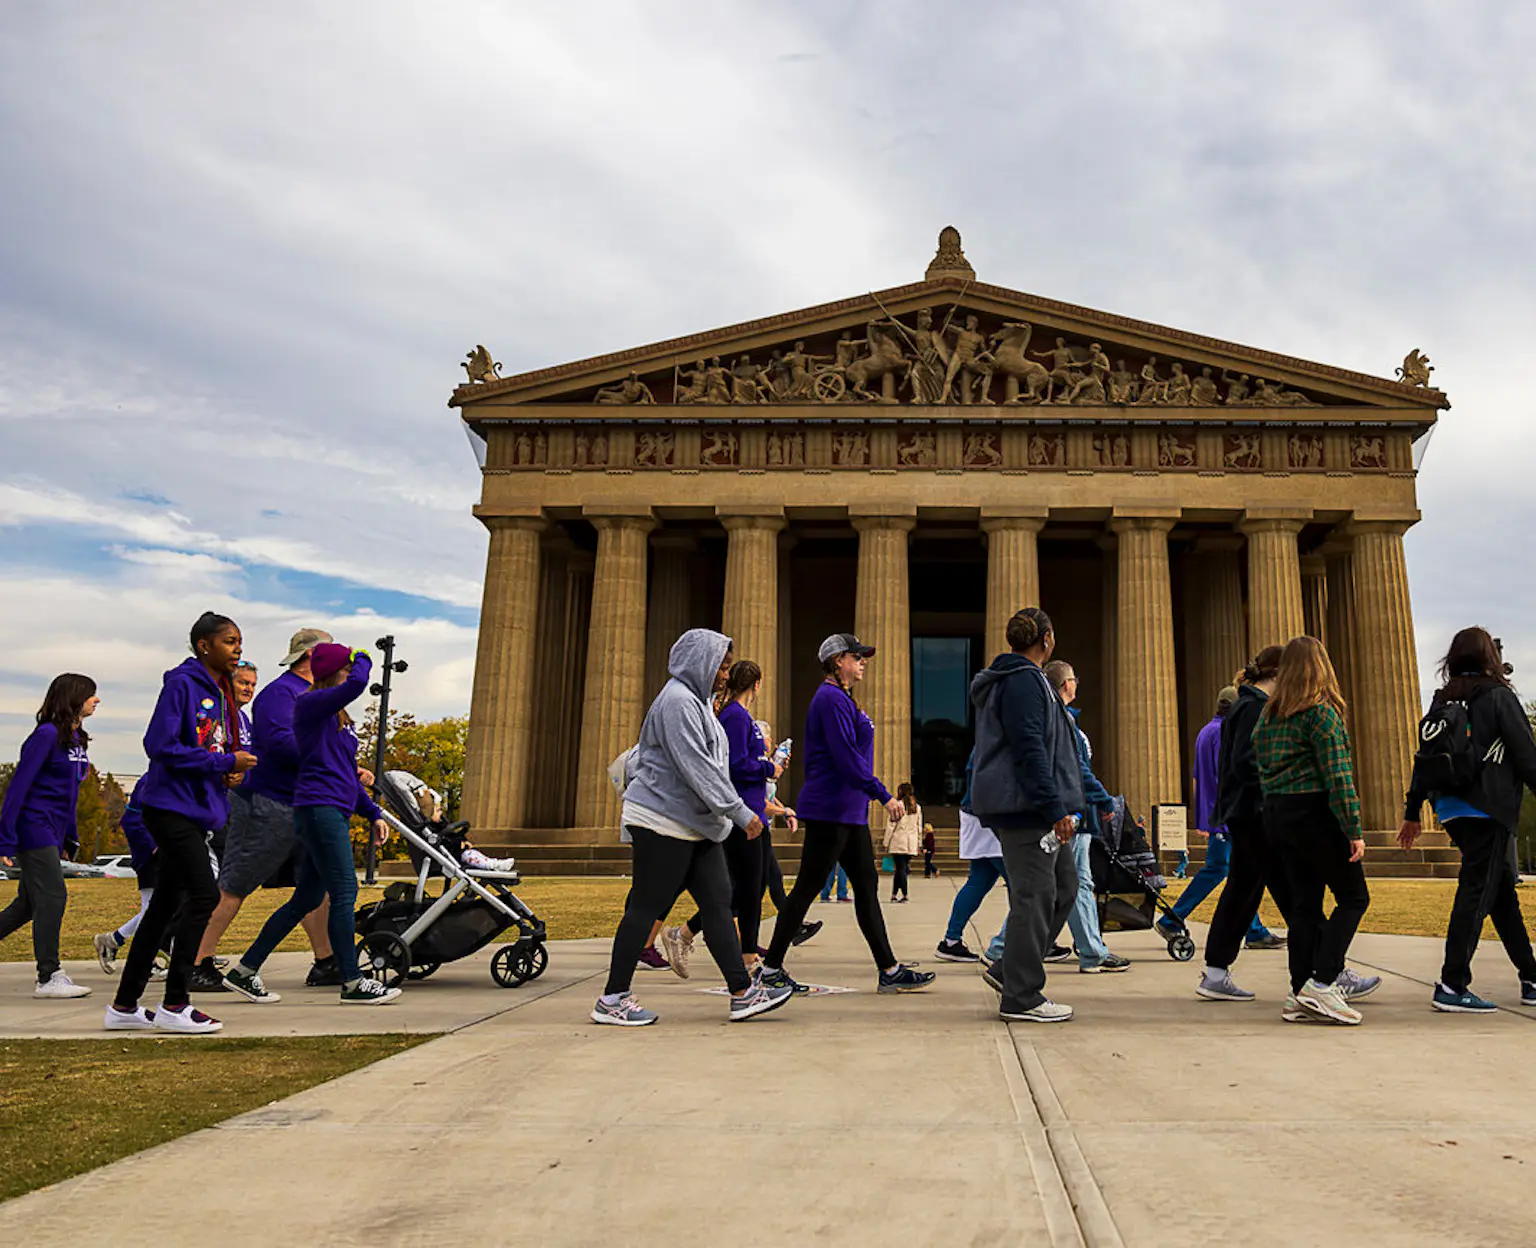 Walkers walk in front of the Parthenon